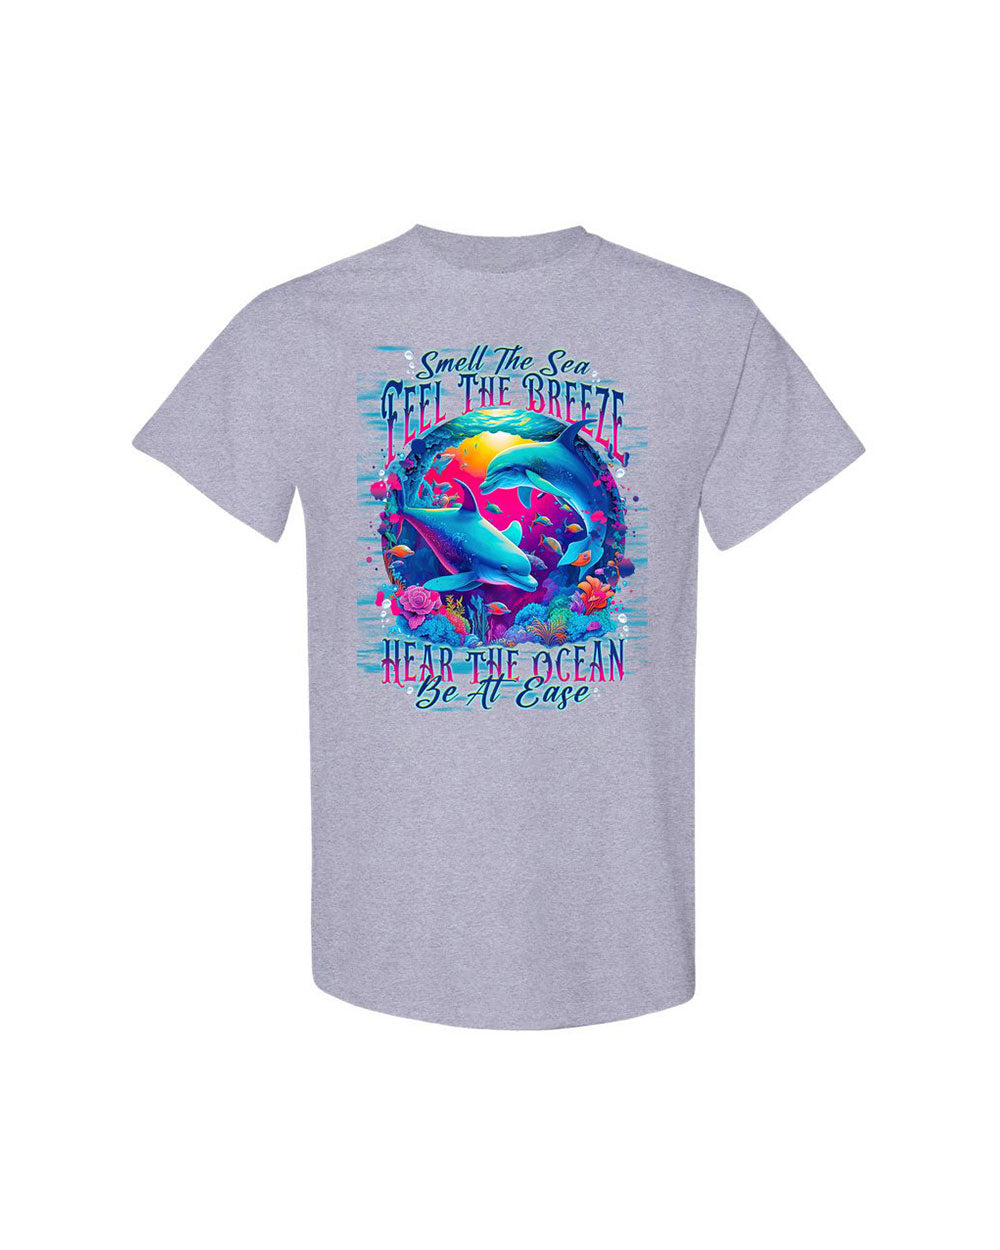 SMELL THE SEA FEEL THE BREEZE DOLPHIN COTTON SHIRT - TLNT0809231